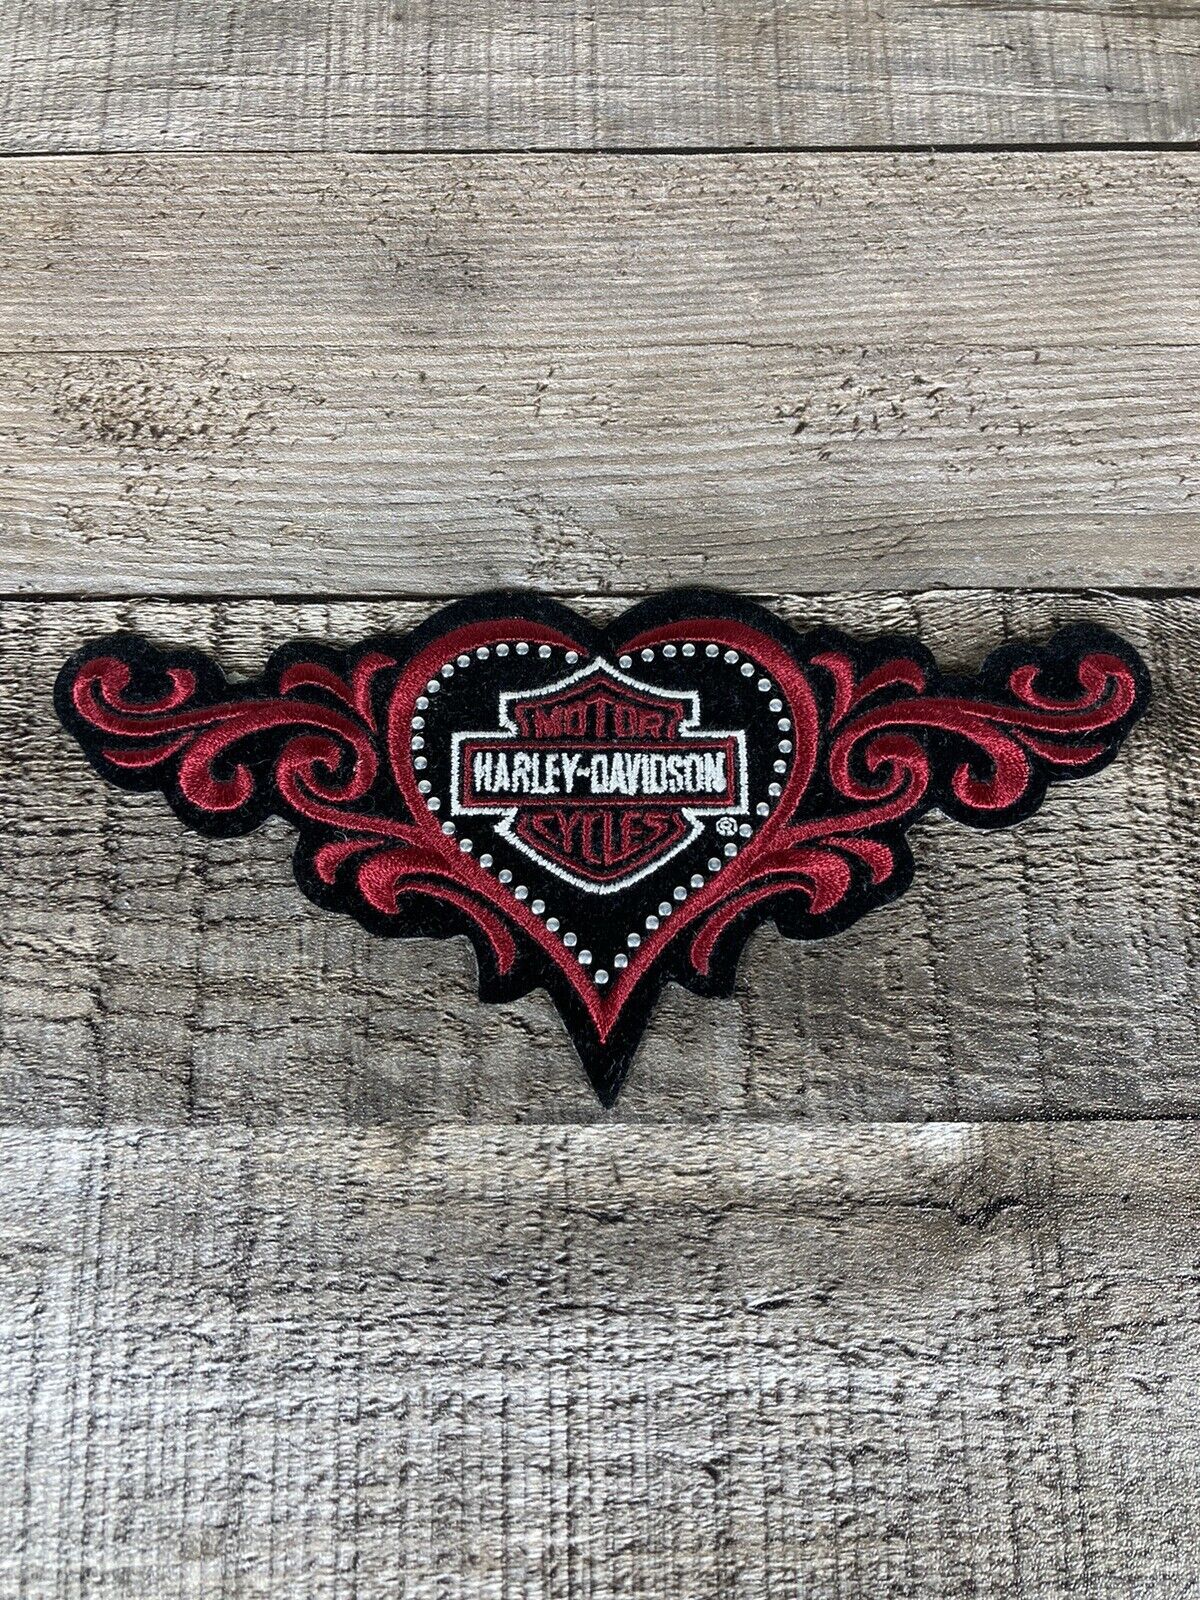 Harley Davidson Red Motorcycles Embroidered Patch Wing Logo Iron/sew On